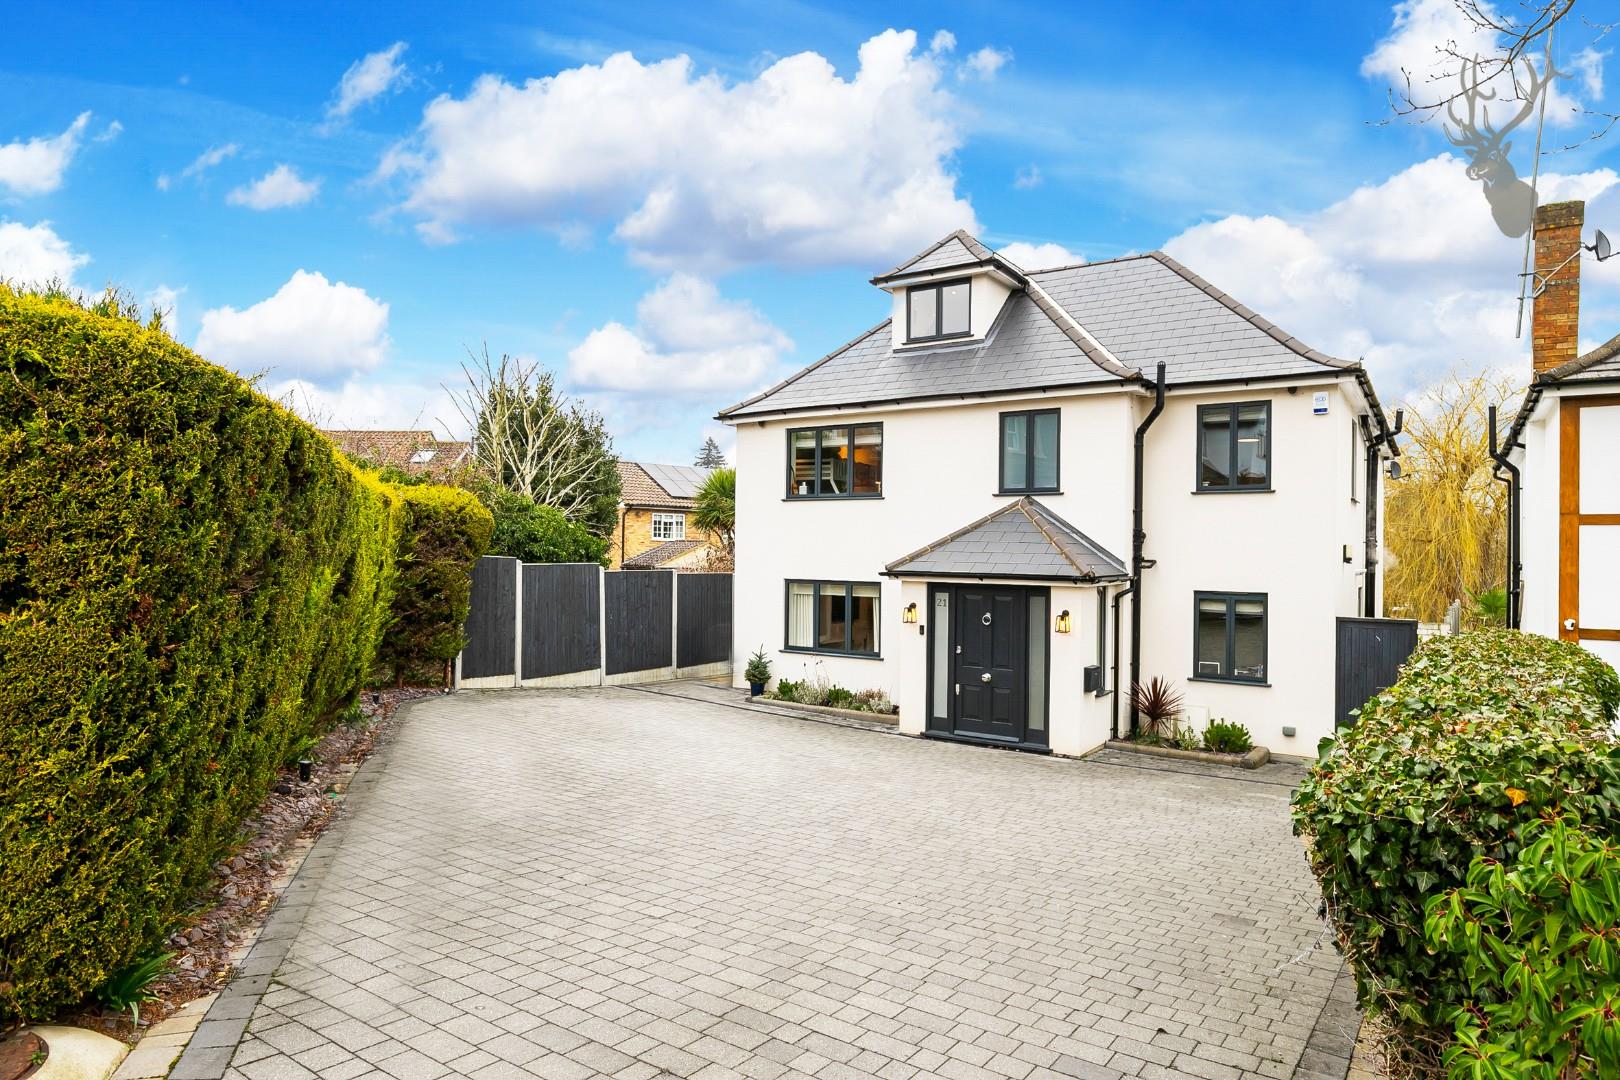 Similar Property: House - Detached in Loughton